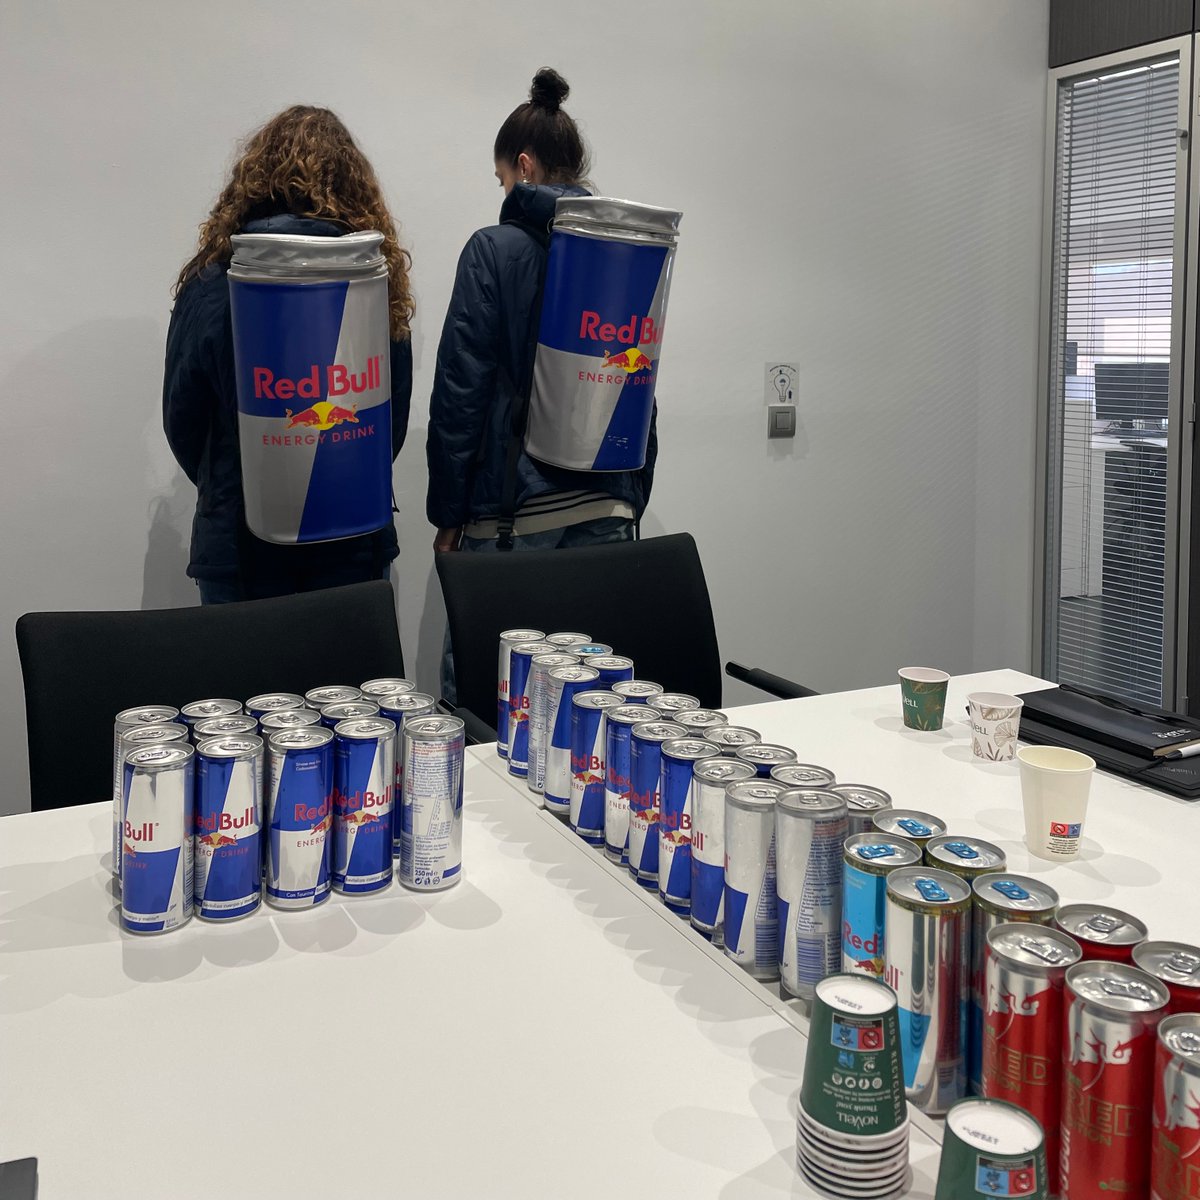 ⚡ Ready for an extreme experience?! Let's get our wings on at our #HackingVillage! @redbull will be with us for a truly electrifying experience at the #BCC24, and today we were very happy to receive their visit and decrypt all the amazing flavours we'll enjoy together soon 💥